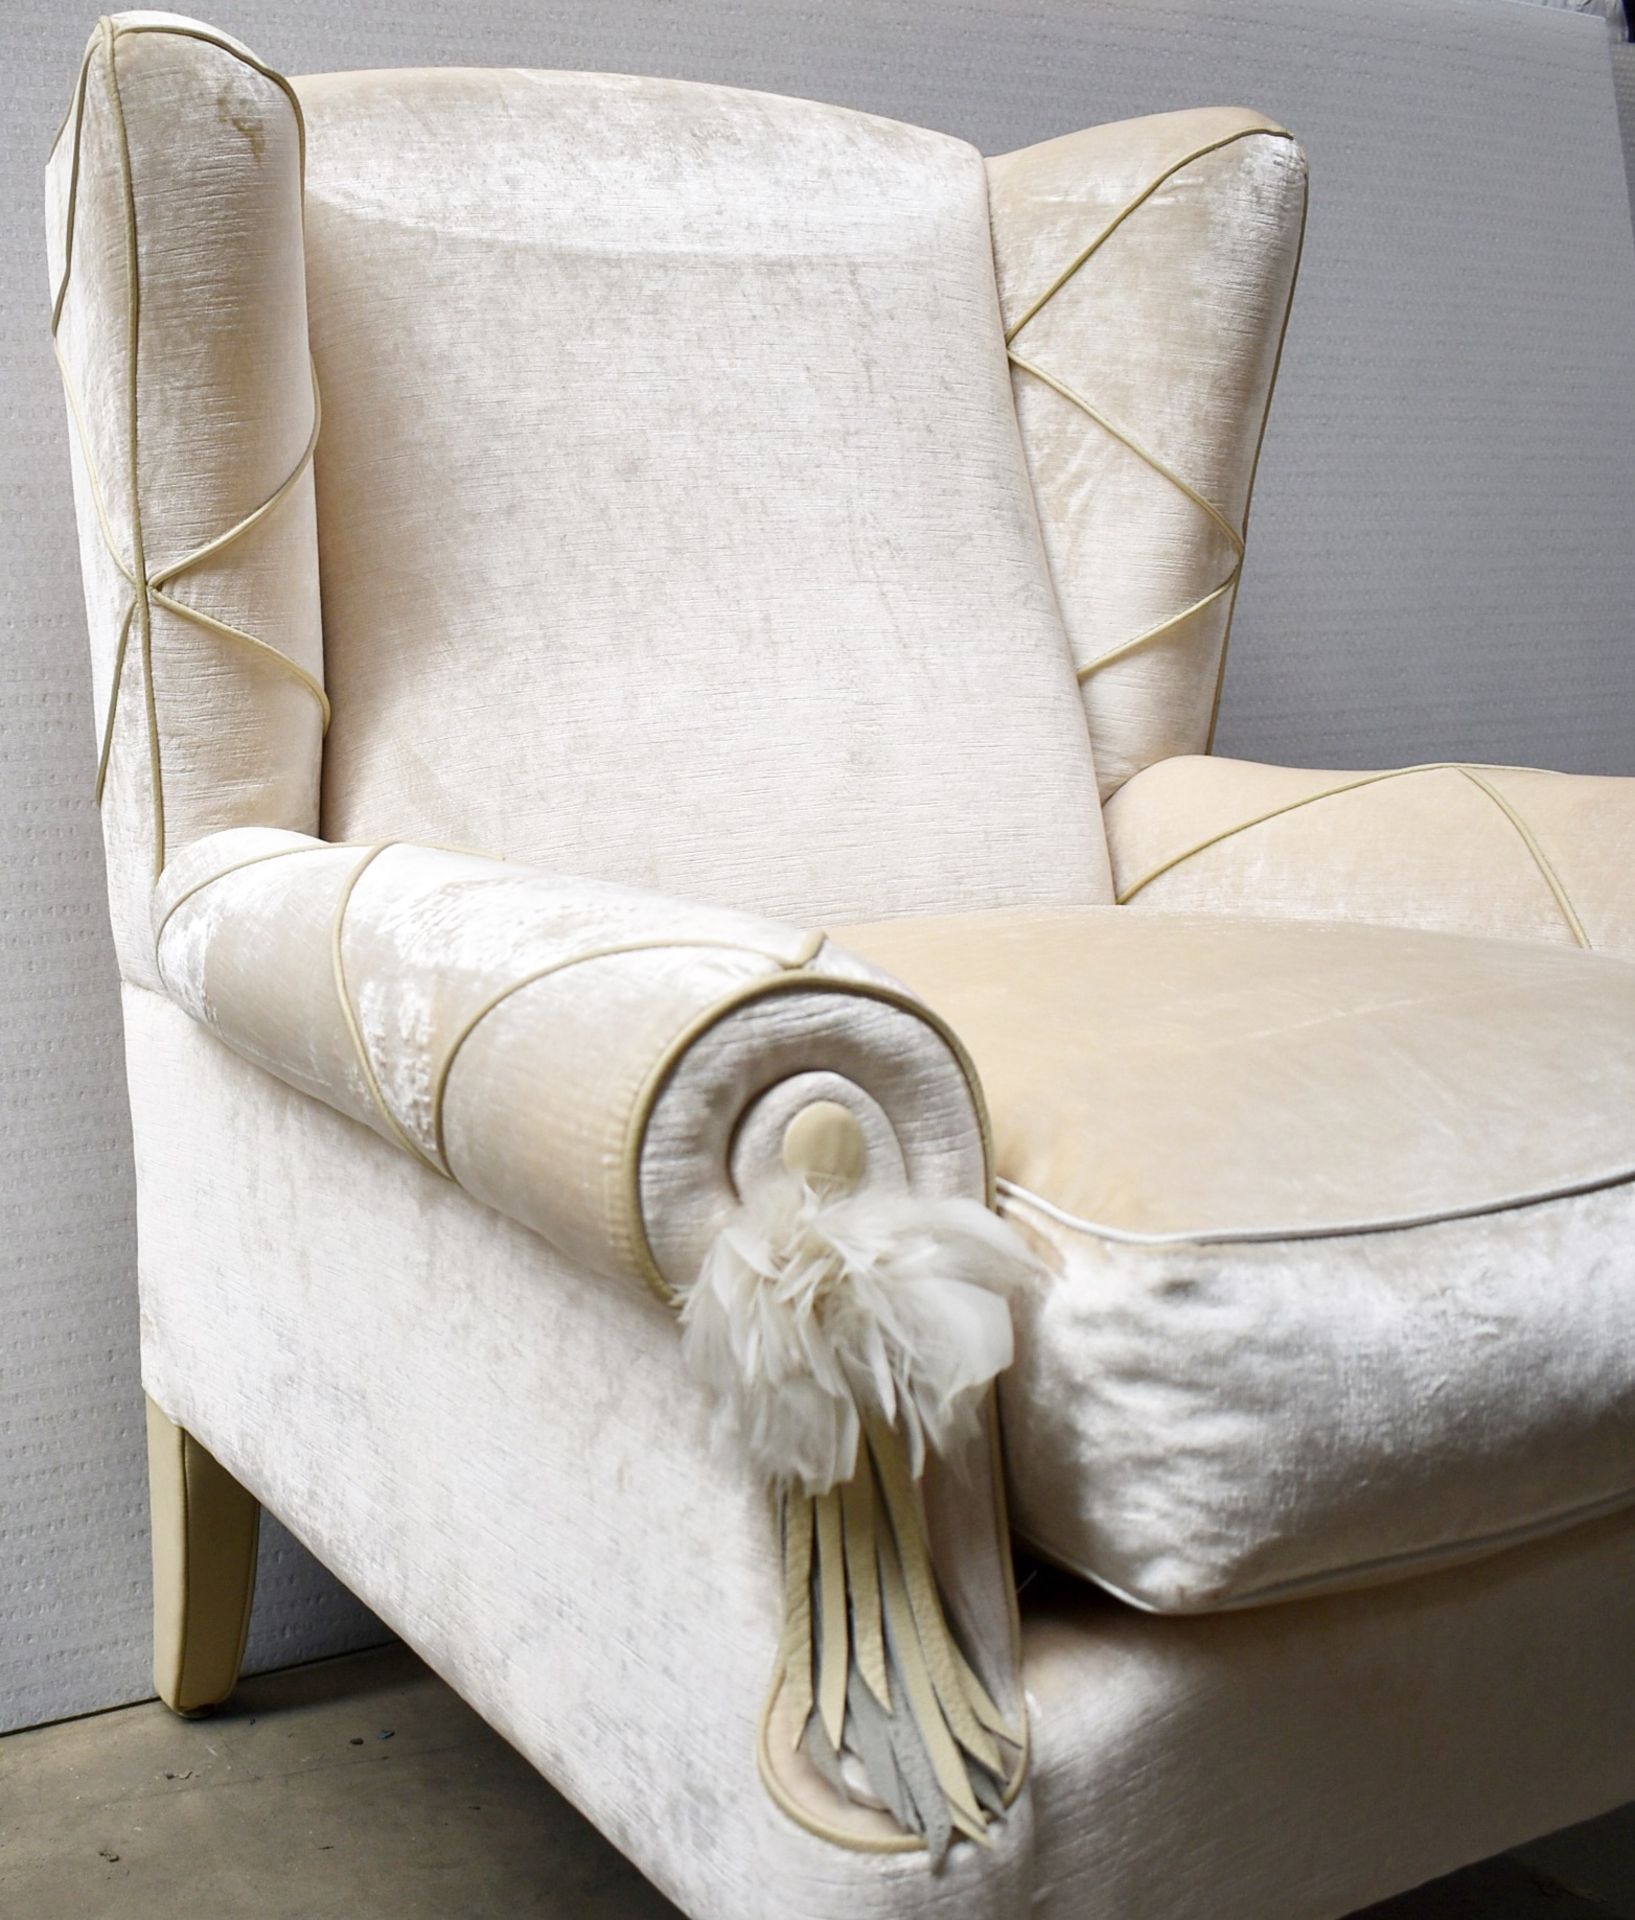 Set Of 2 x Bespoke Fireside Wingback Cream Leather Armchair With Stitch Arms & Feather Detail - Image 13 of 14